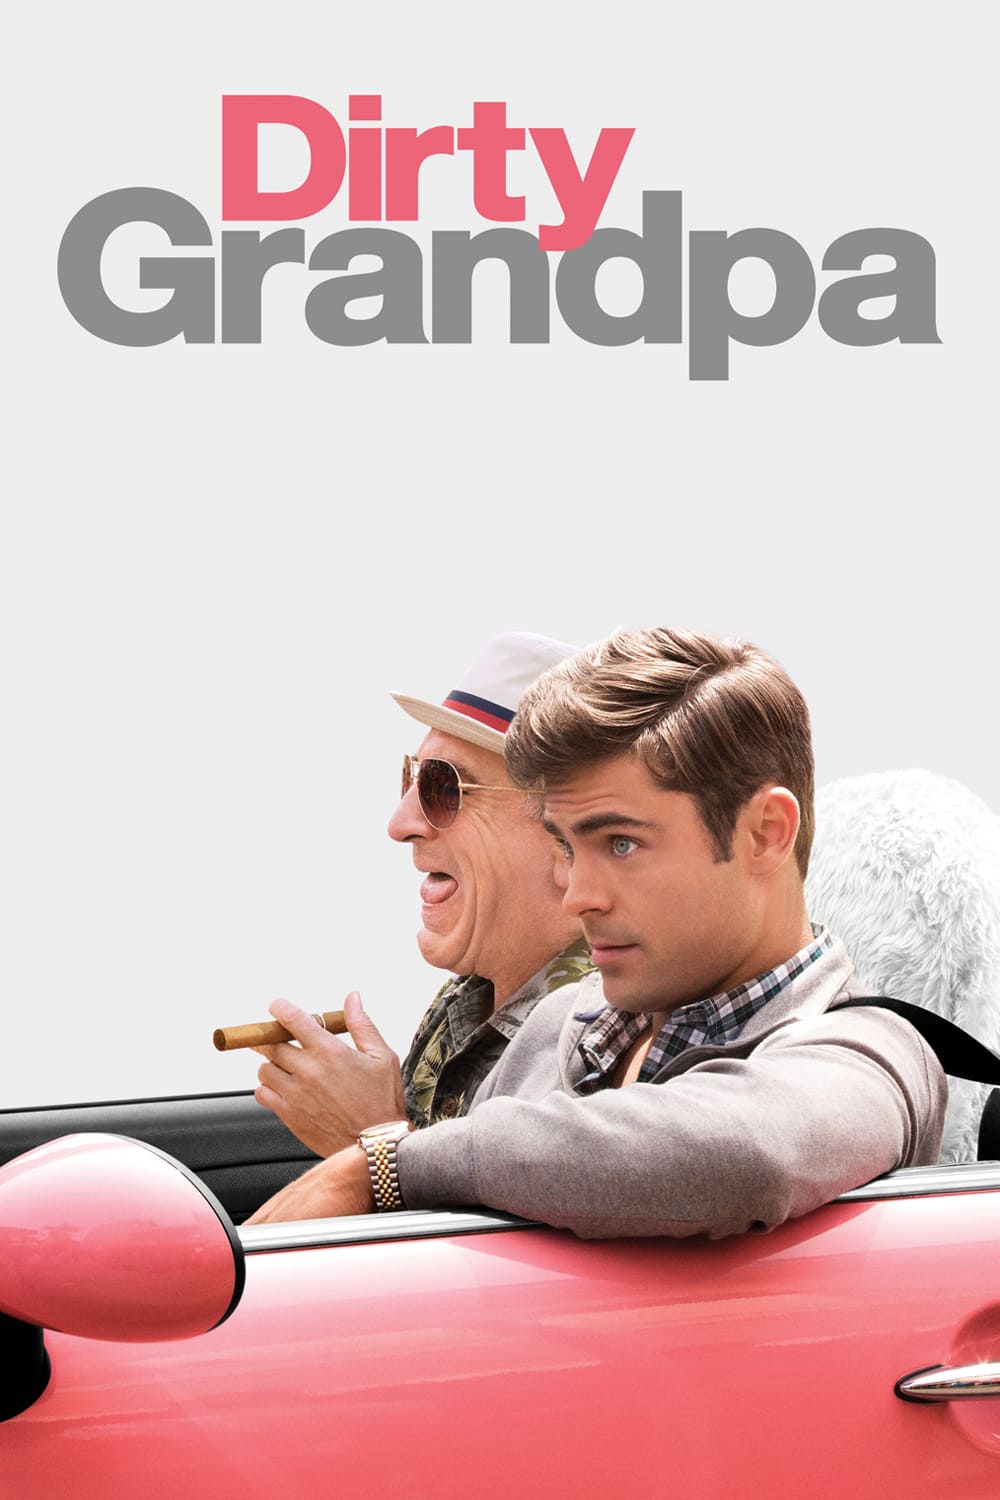 dirty grandpa full movie free online no sign up no download